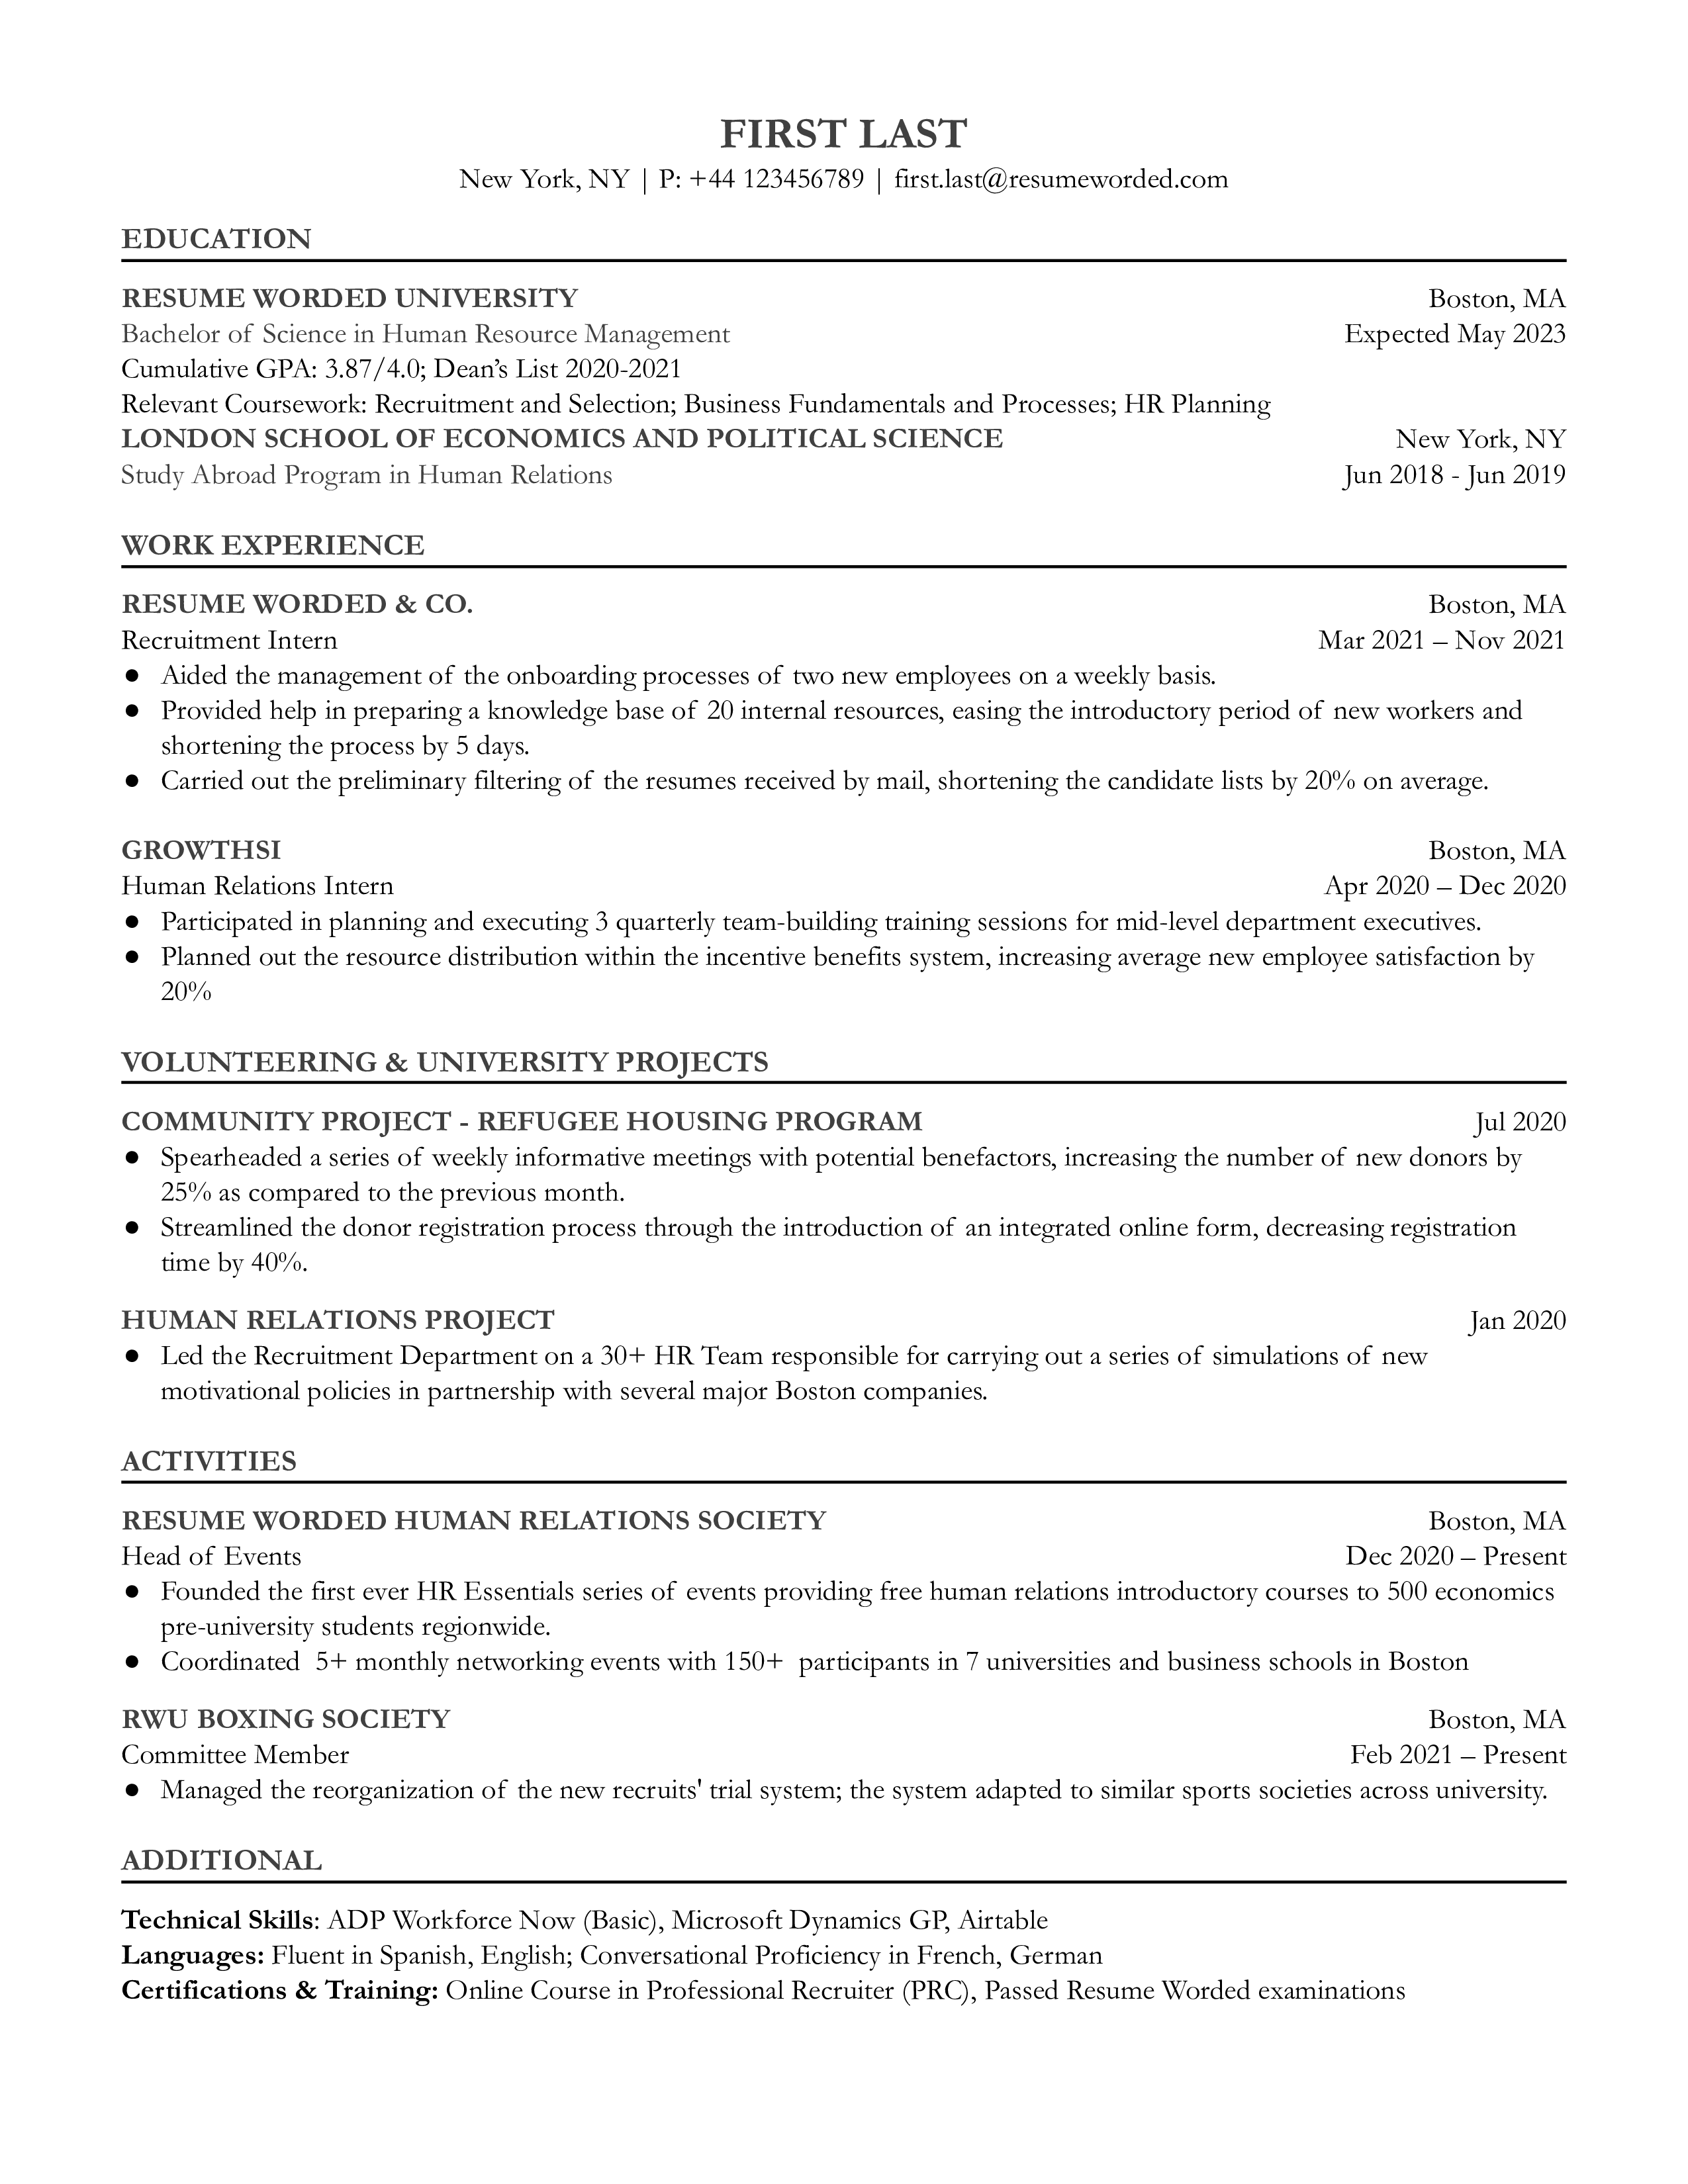 A junior recruitment resume sample that highlights the activities that have transferable skills and relevant experience.